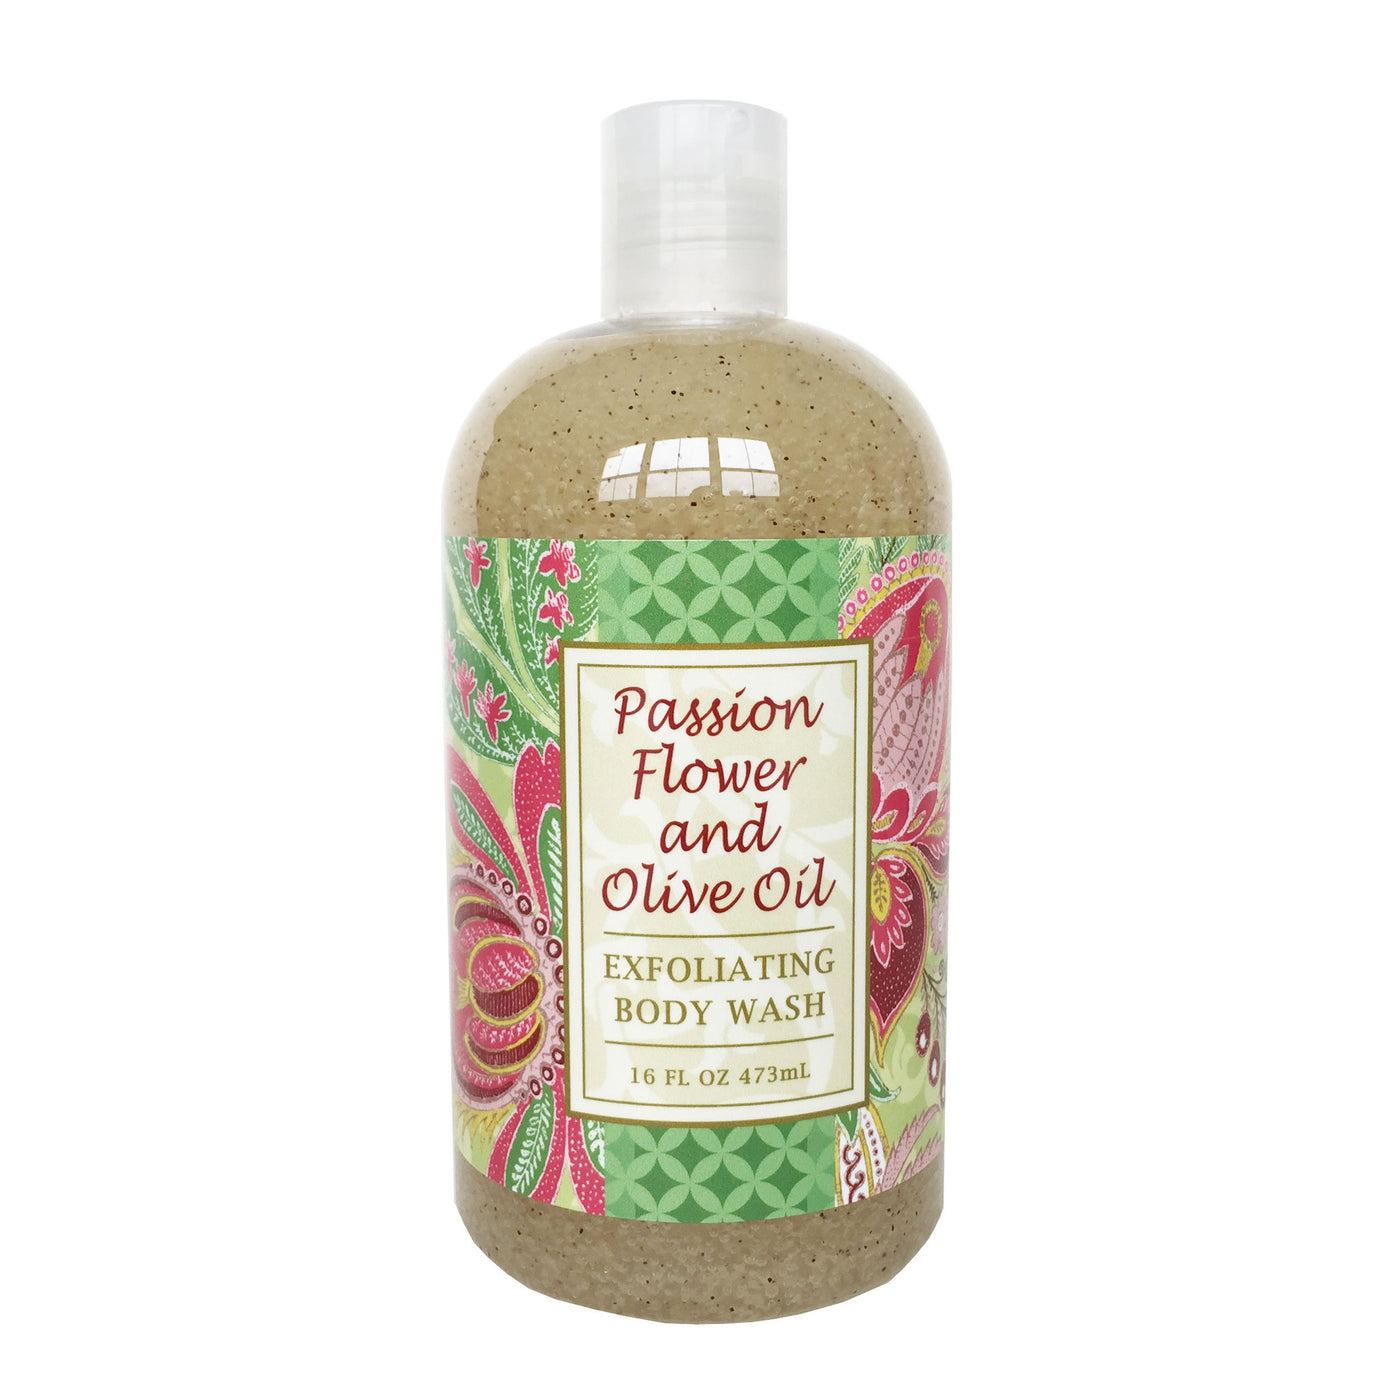 Passion Flower Olive Oil Exfoliating Body Wash